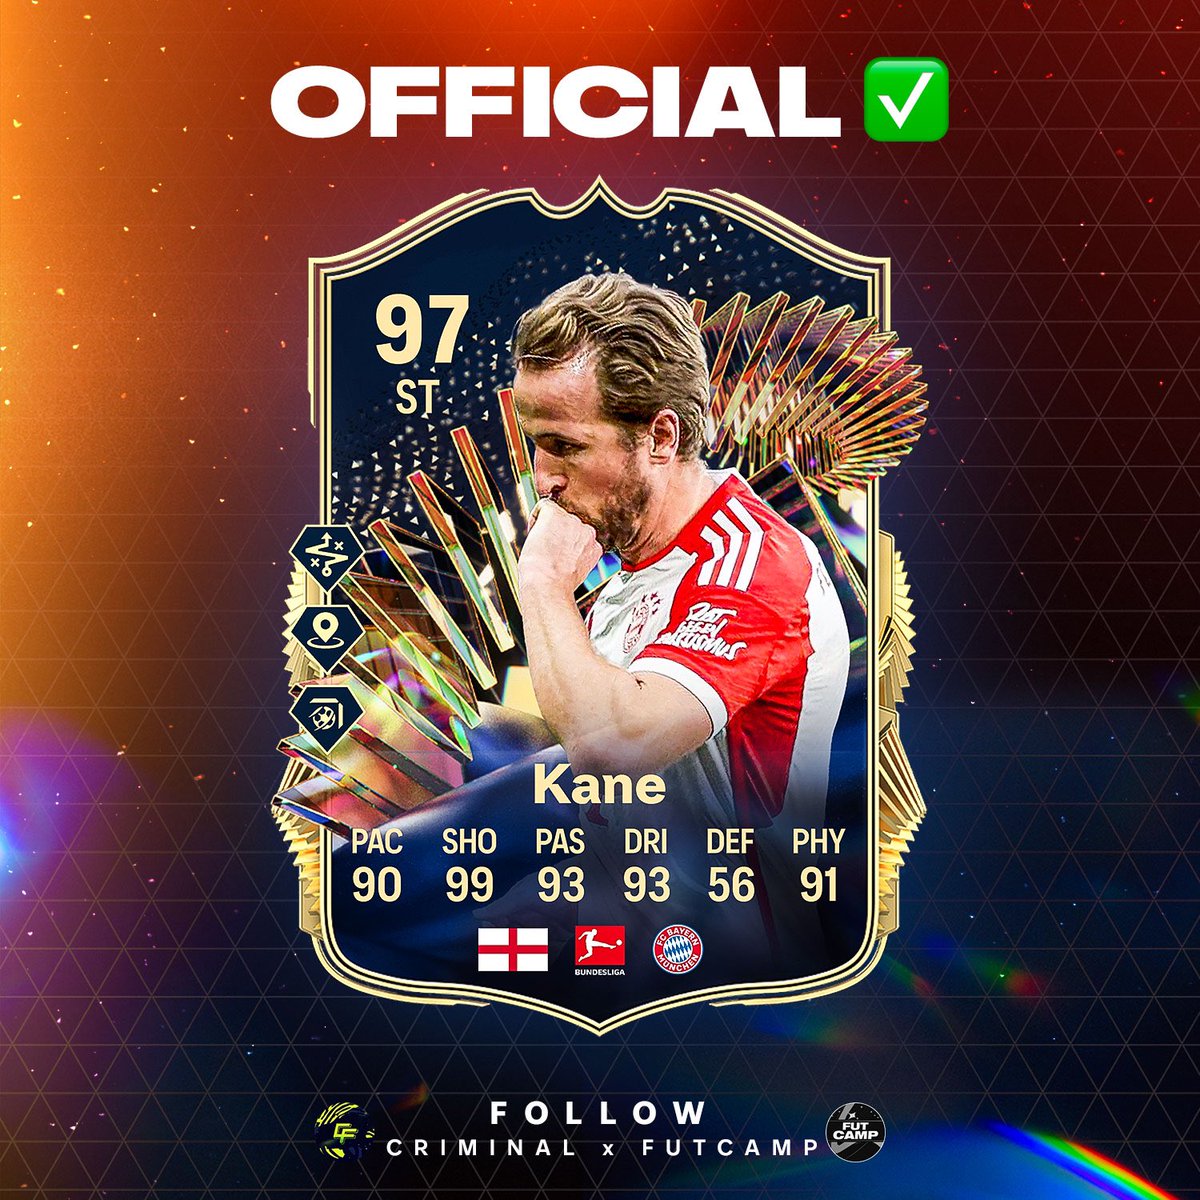 HARRY KANE TOTS OFFICIAL CARD 👀 Best striker in the world? 🏴󠁧󠁢󠁥󠁮󠁧󠁿 Stats ✅ PS+ ✅ Dynamic ✅ Collab with @Criminal__x 🎨 Make sure to follow @fut_camp for more leaks 🔔